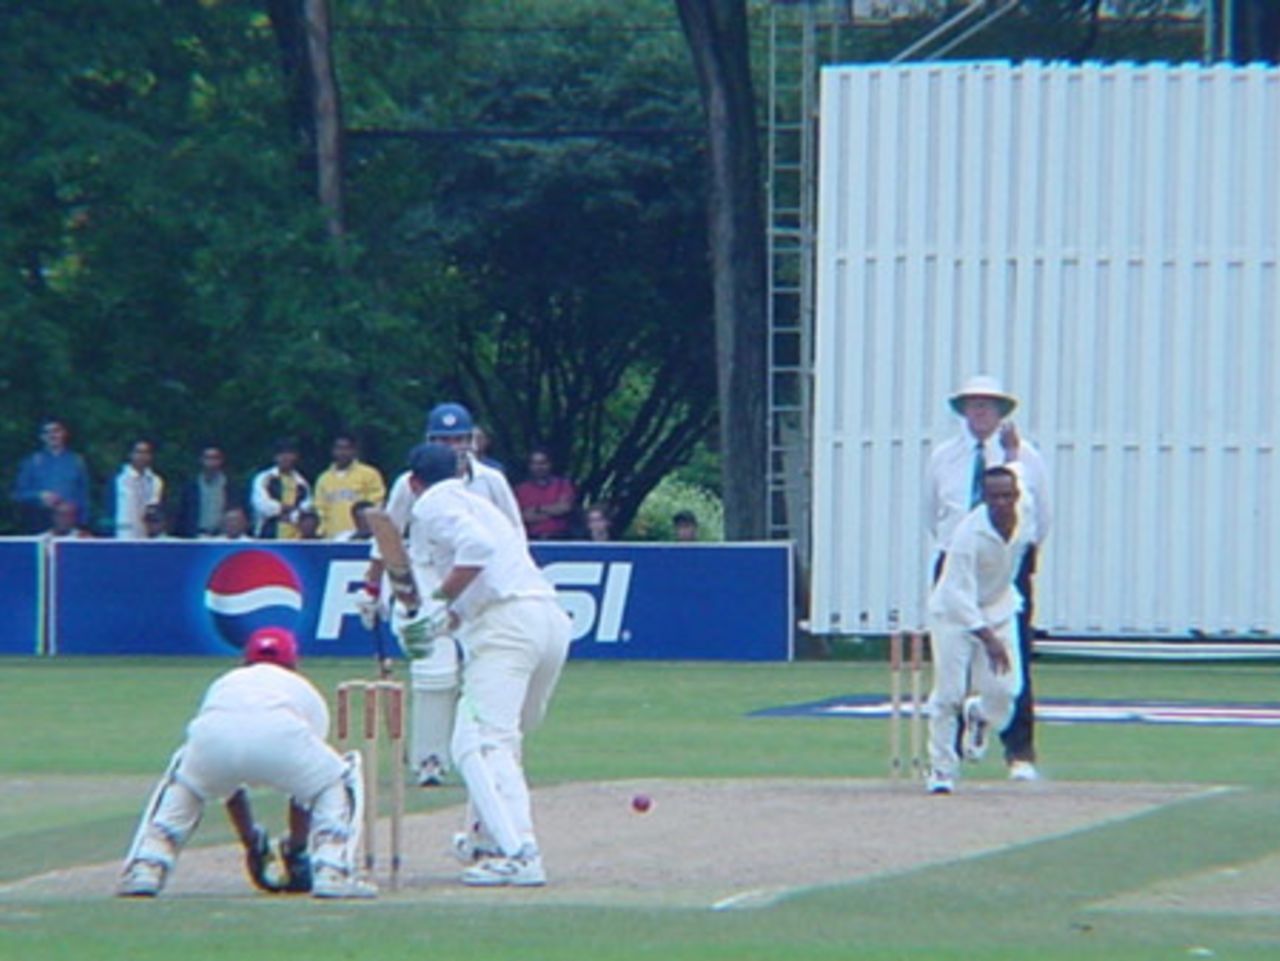 Canadian medium pace bowler Nicholas Degroot bowls to Scottish batsman Drew Parsons. Wicket-keeper Ashish Bagai, batsman George Salmond (obscured) and Australian umpire Darrell Hair look on. ICC Trophy 2001: Canada v Scotland, Toronto Cricket, Skating and Curling Club, 17 July 2001.